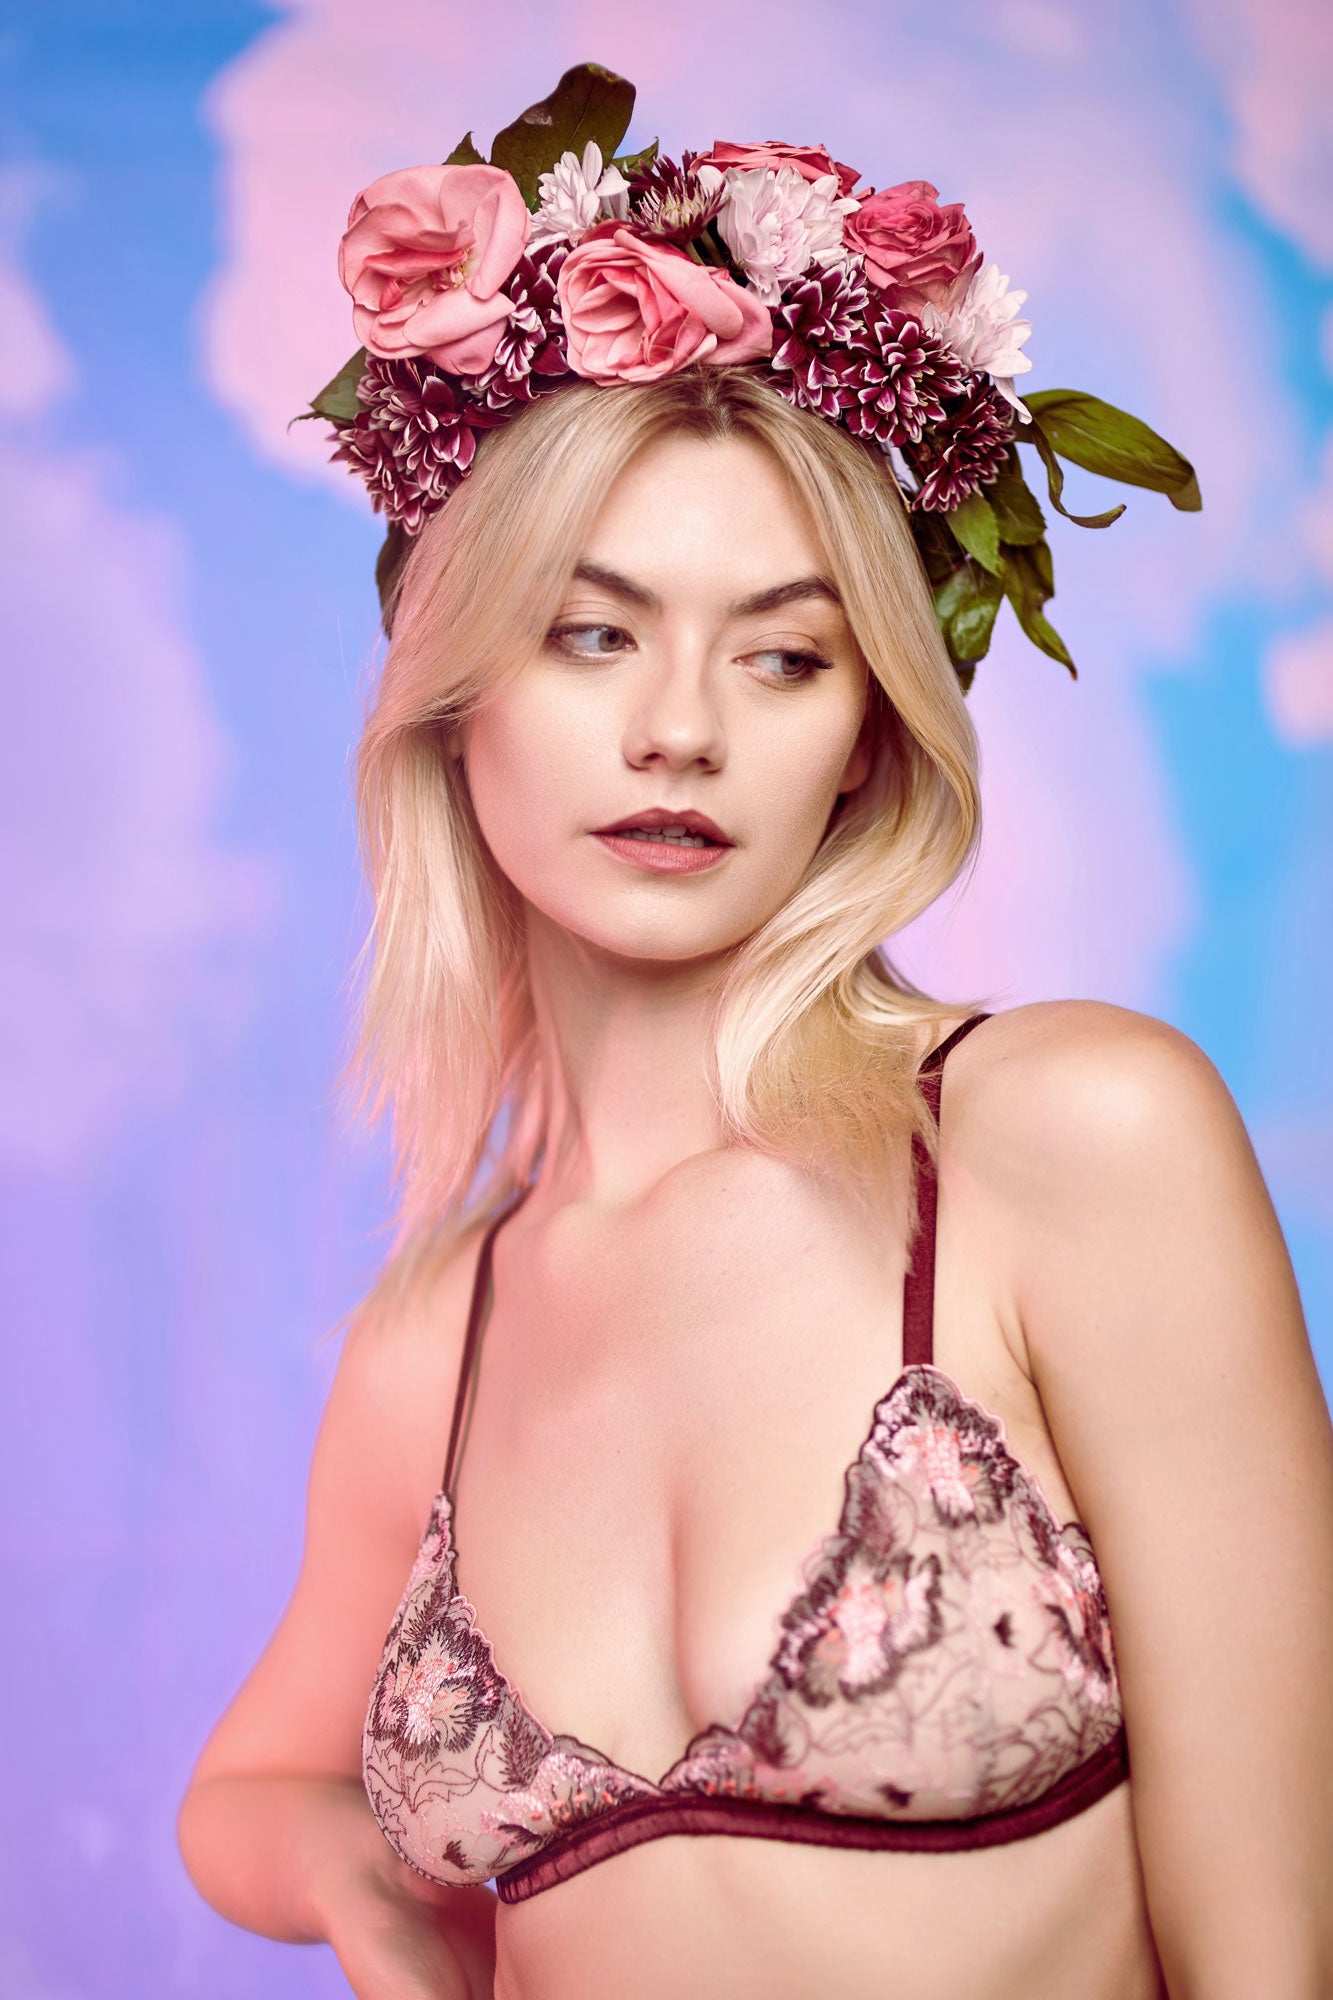 Burgundy silk and lace bralette with a pink flower crown and silk trims